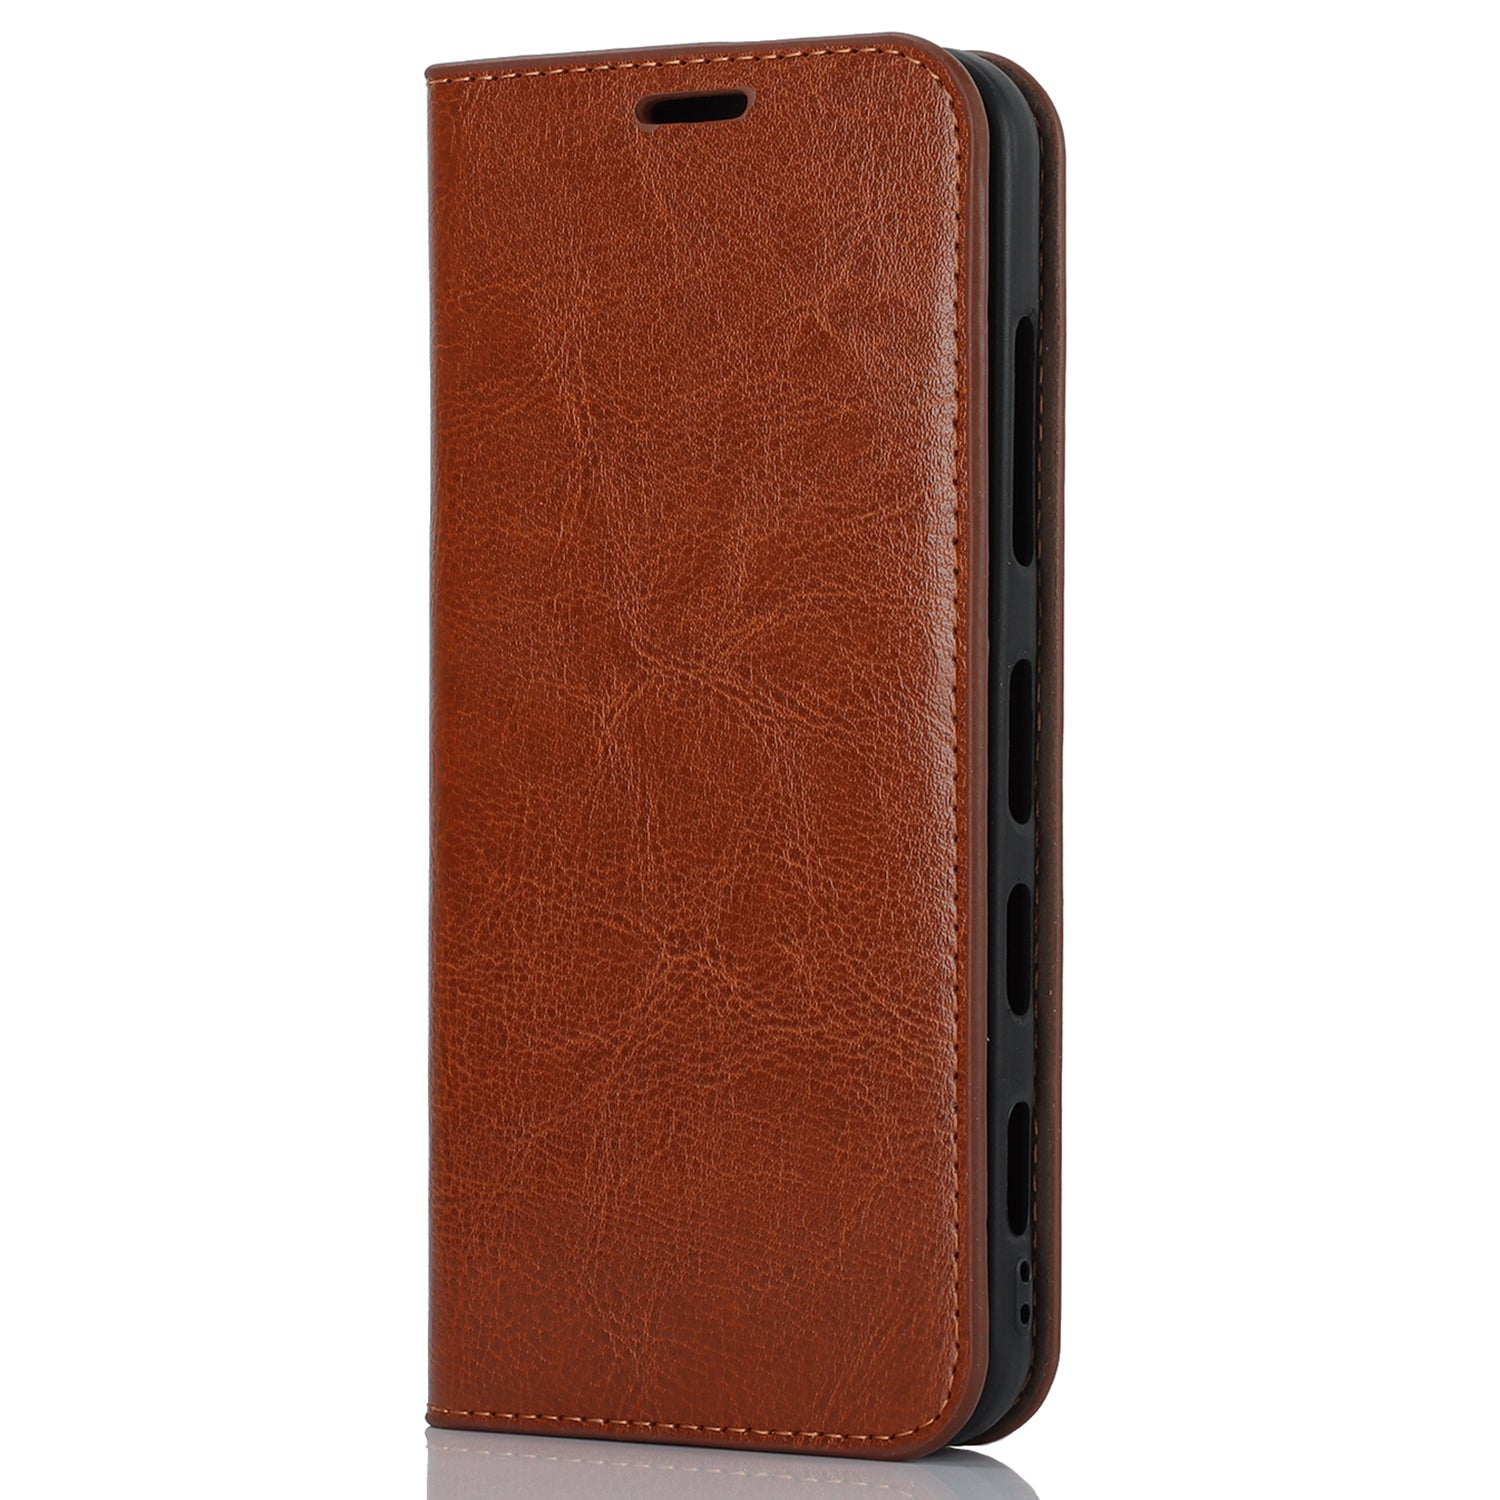 Uniqkart for Kyocera Android One S10 / One S9 Fall Proof Phone Case Crazy Horse Texture Genuine Cow Leather Stand Wallet Cover - Light Brown